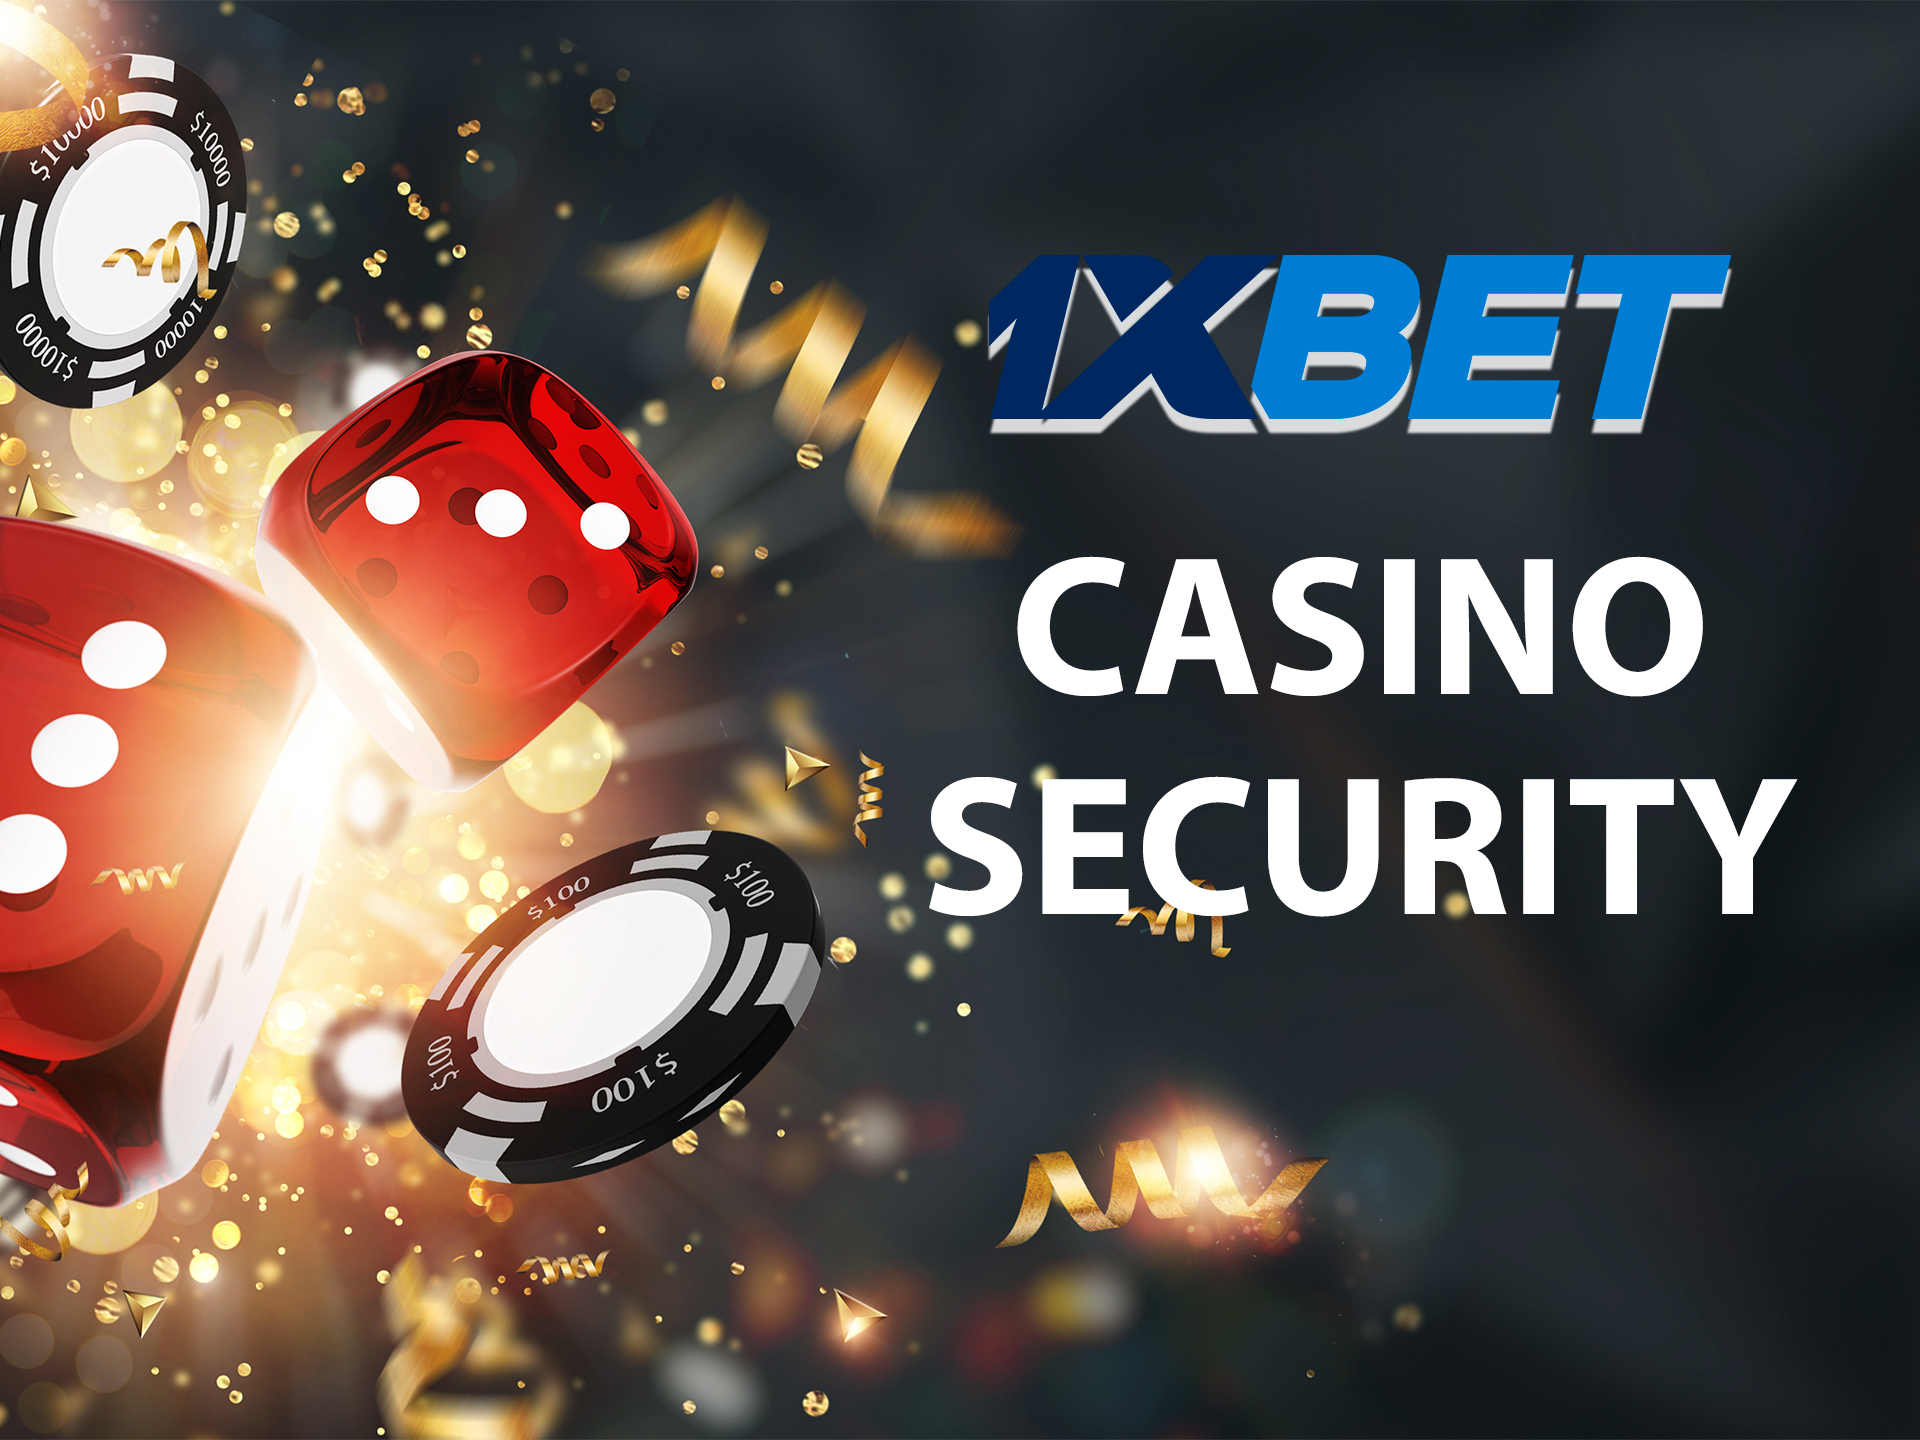 Read carefully all the Terms&Conditions of the 1xbet online casino.